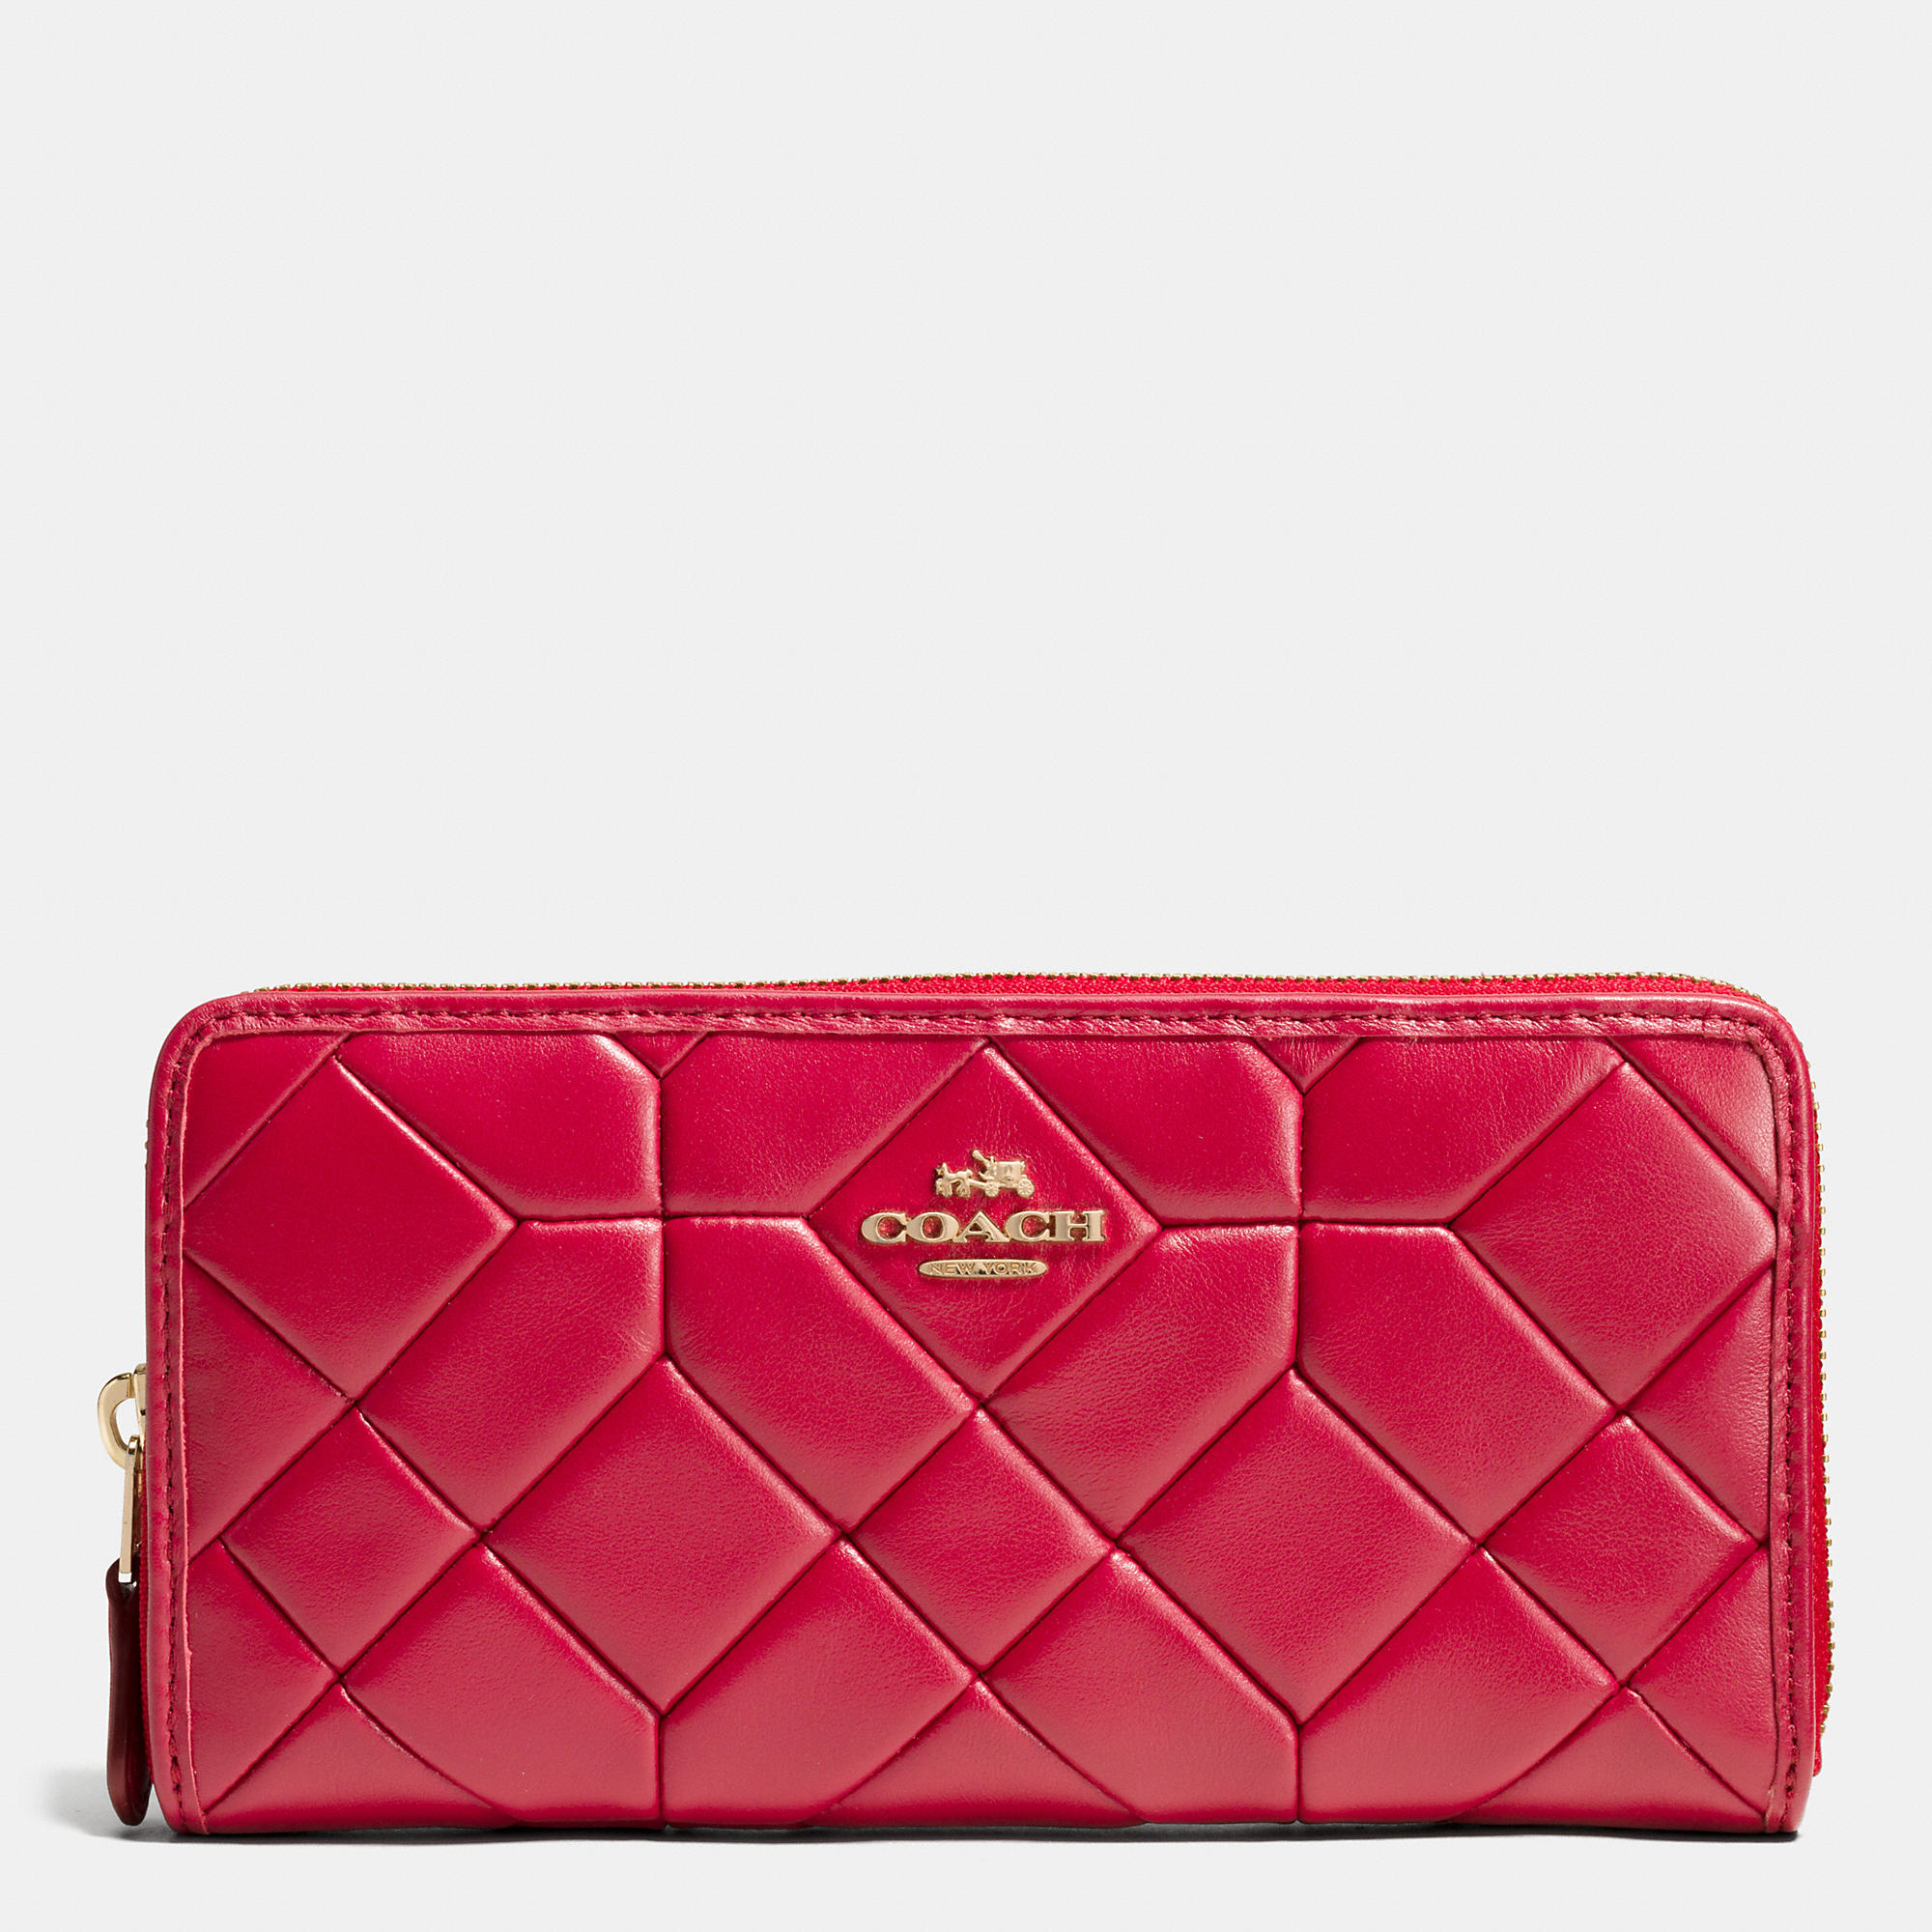 COACH Accordion Zip Wallet In Canyon Quilt Leather in Red